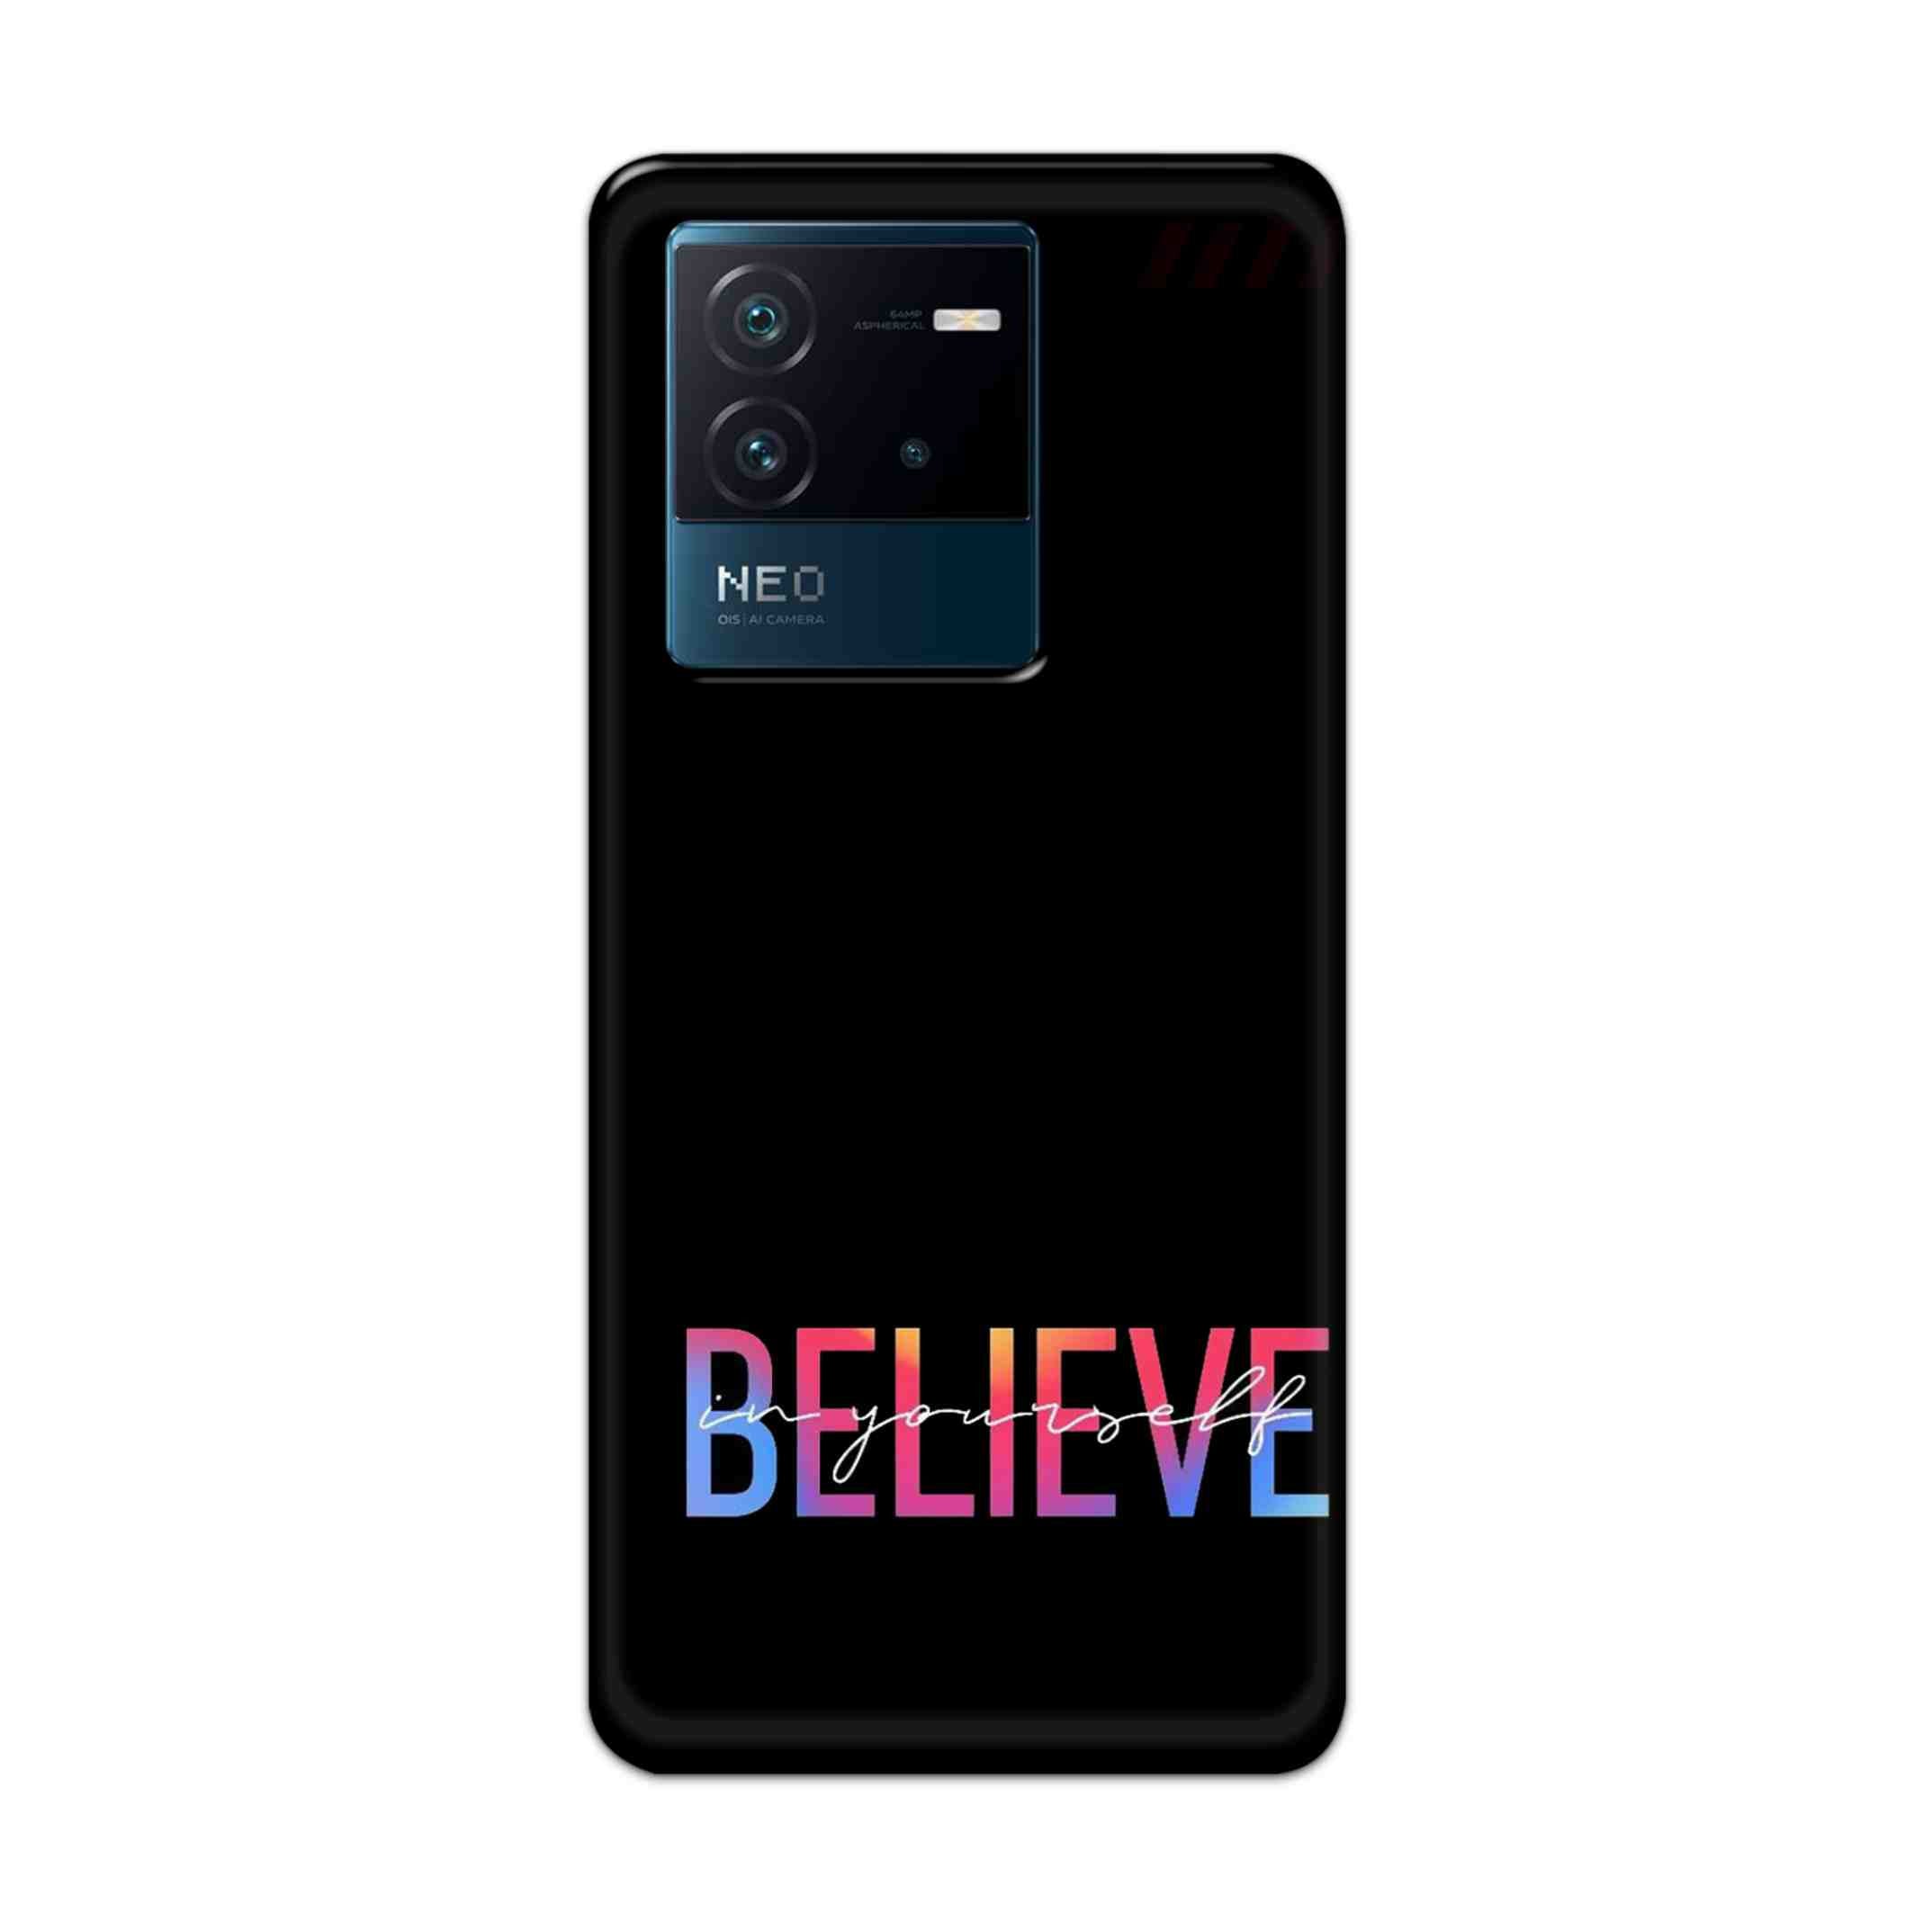 Buy Believe Hard Back Mobile Phone Case Cover For iQOO Neo 6 5G Online